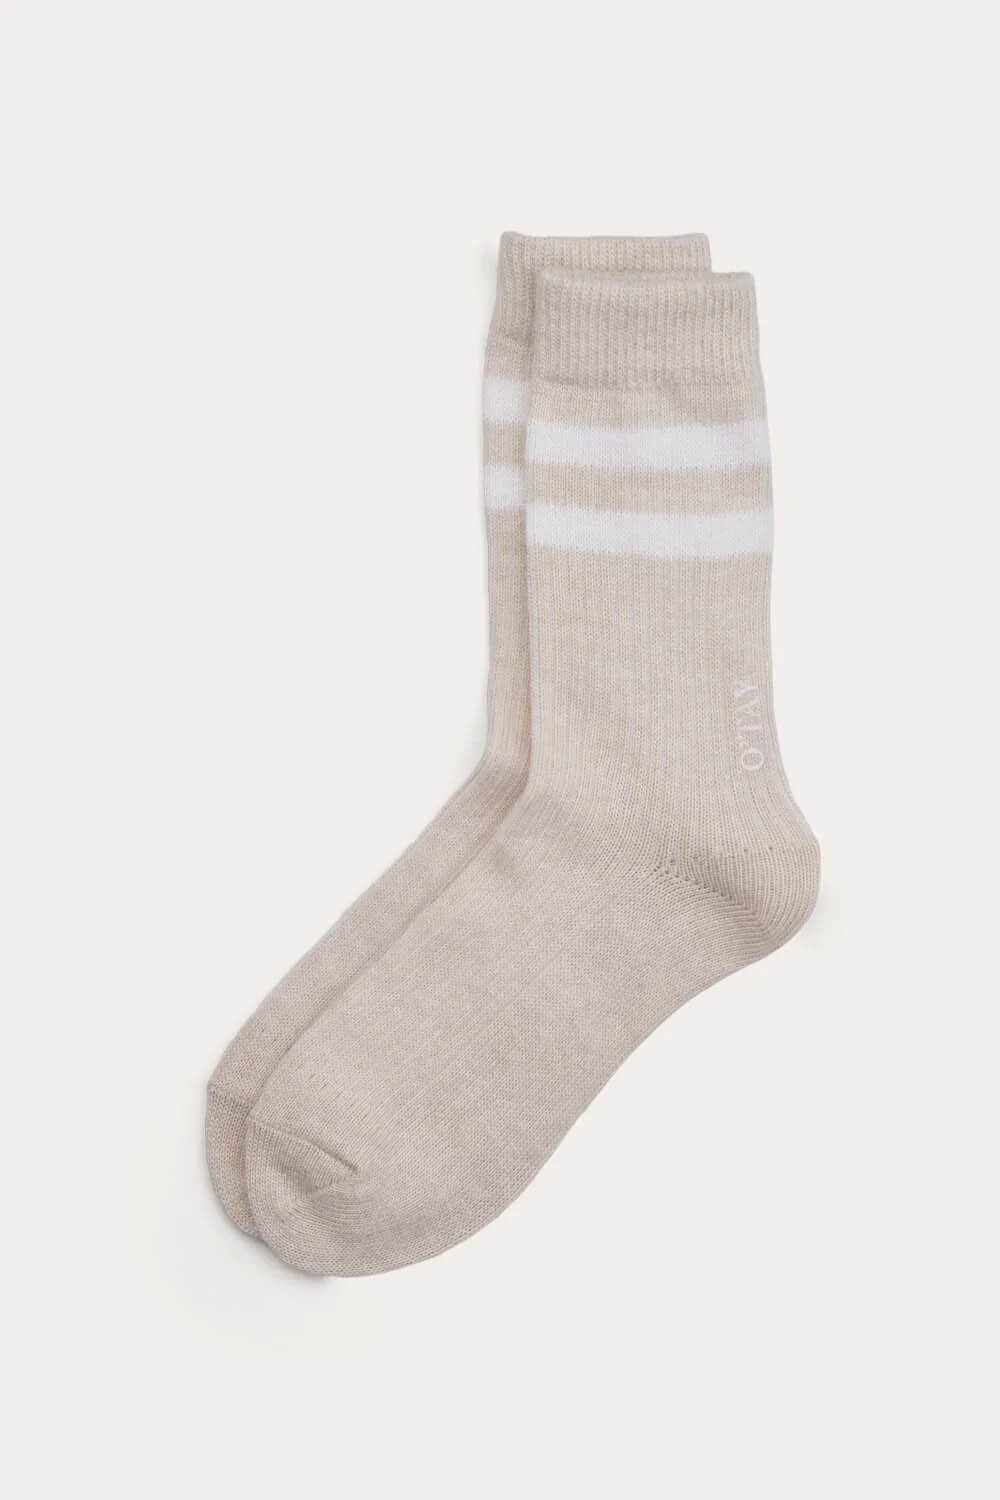 O'TAY Tennis Socks Blend Accessories Sand/Off White